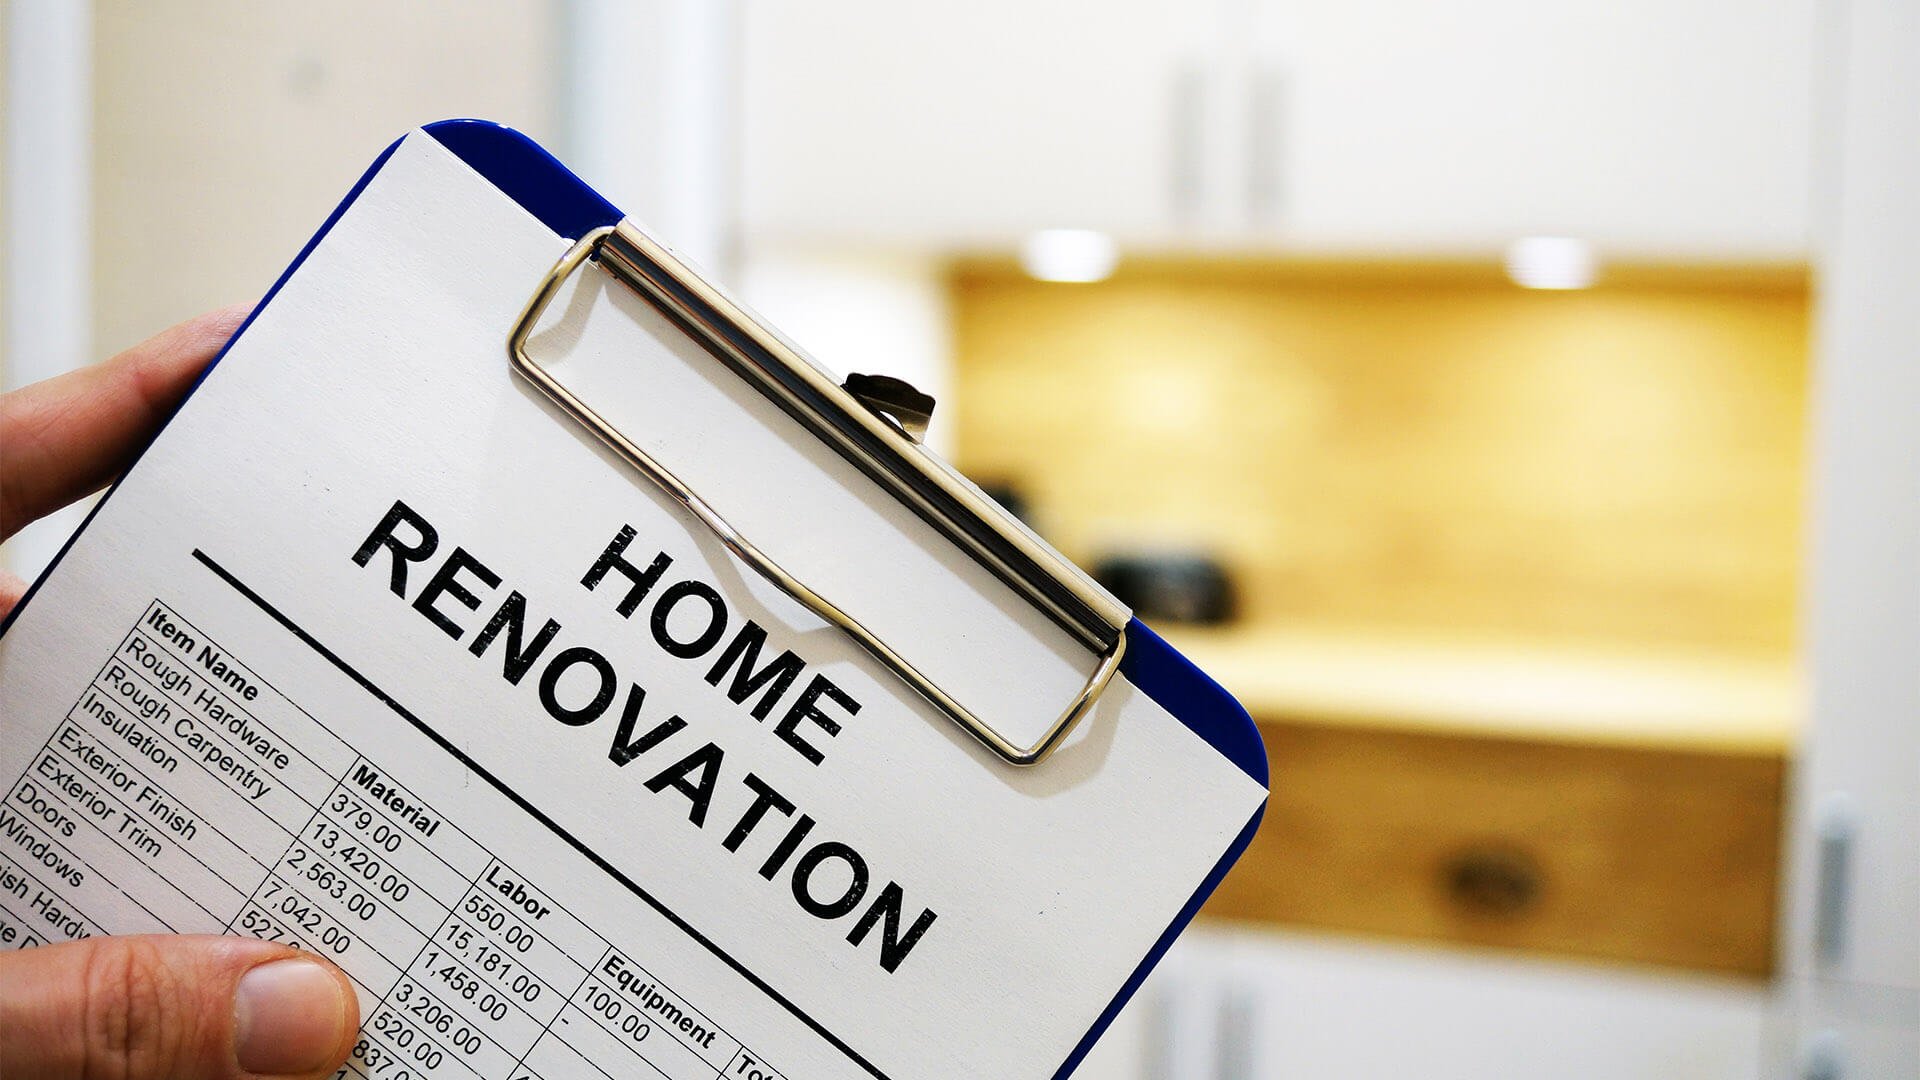 How to estimate renovation costs